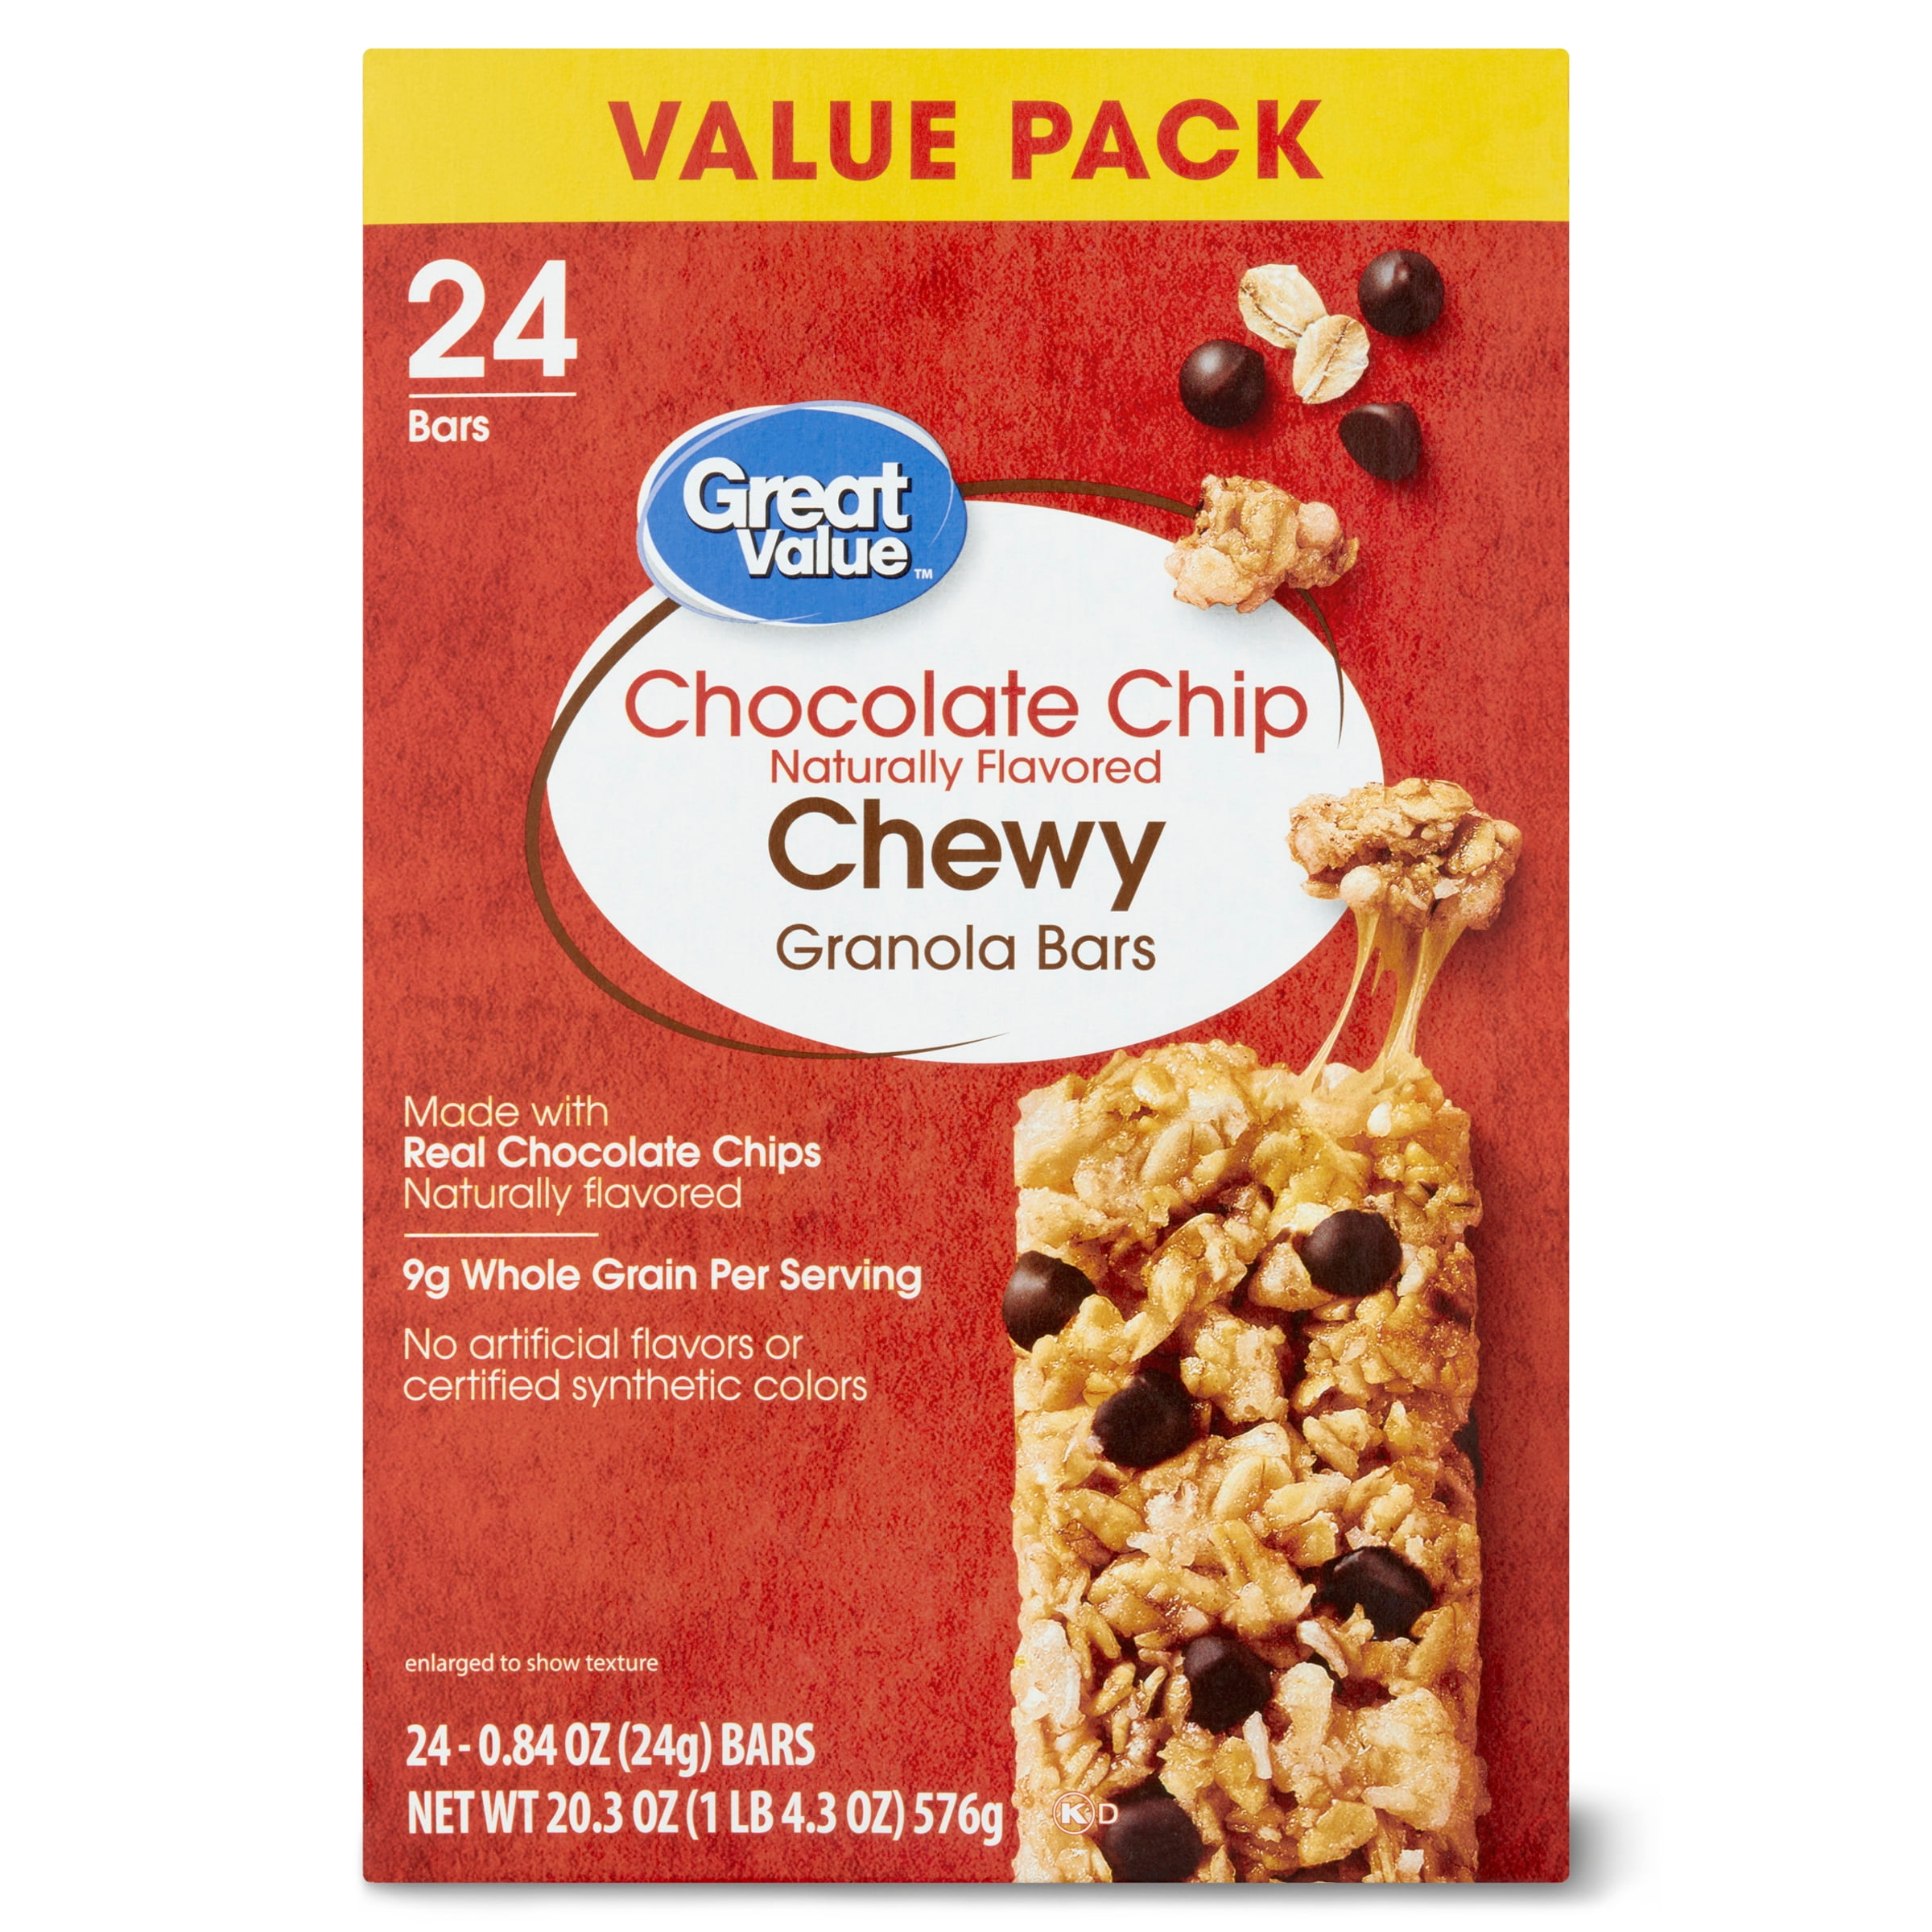 Great Value Chewy Chocolate Chunk Granola Bars Value Pack 20 3 Oz 24